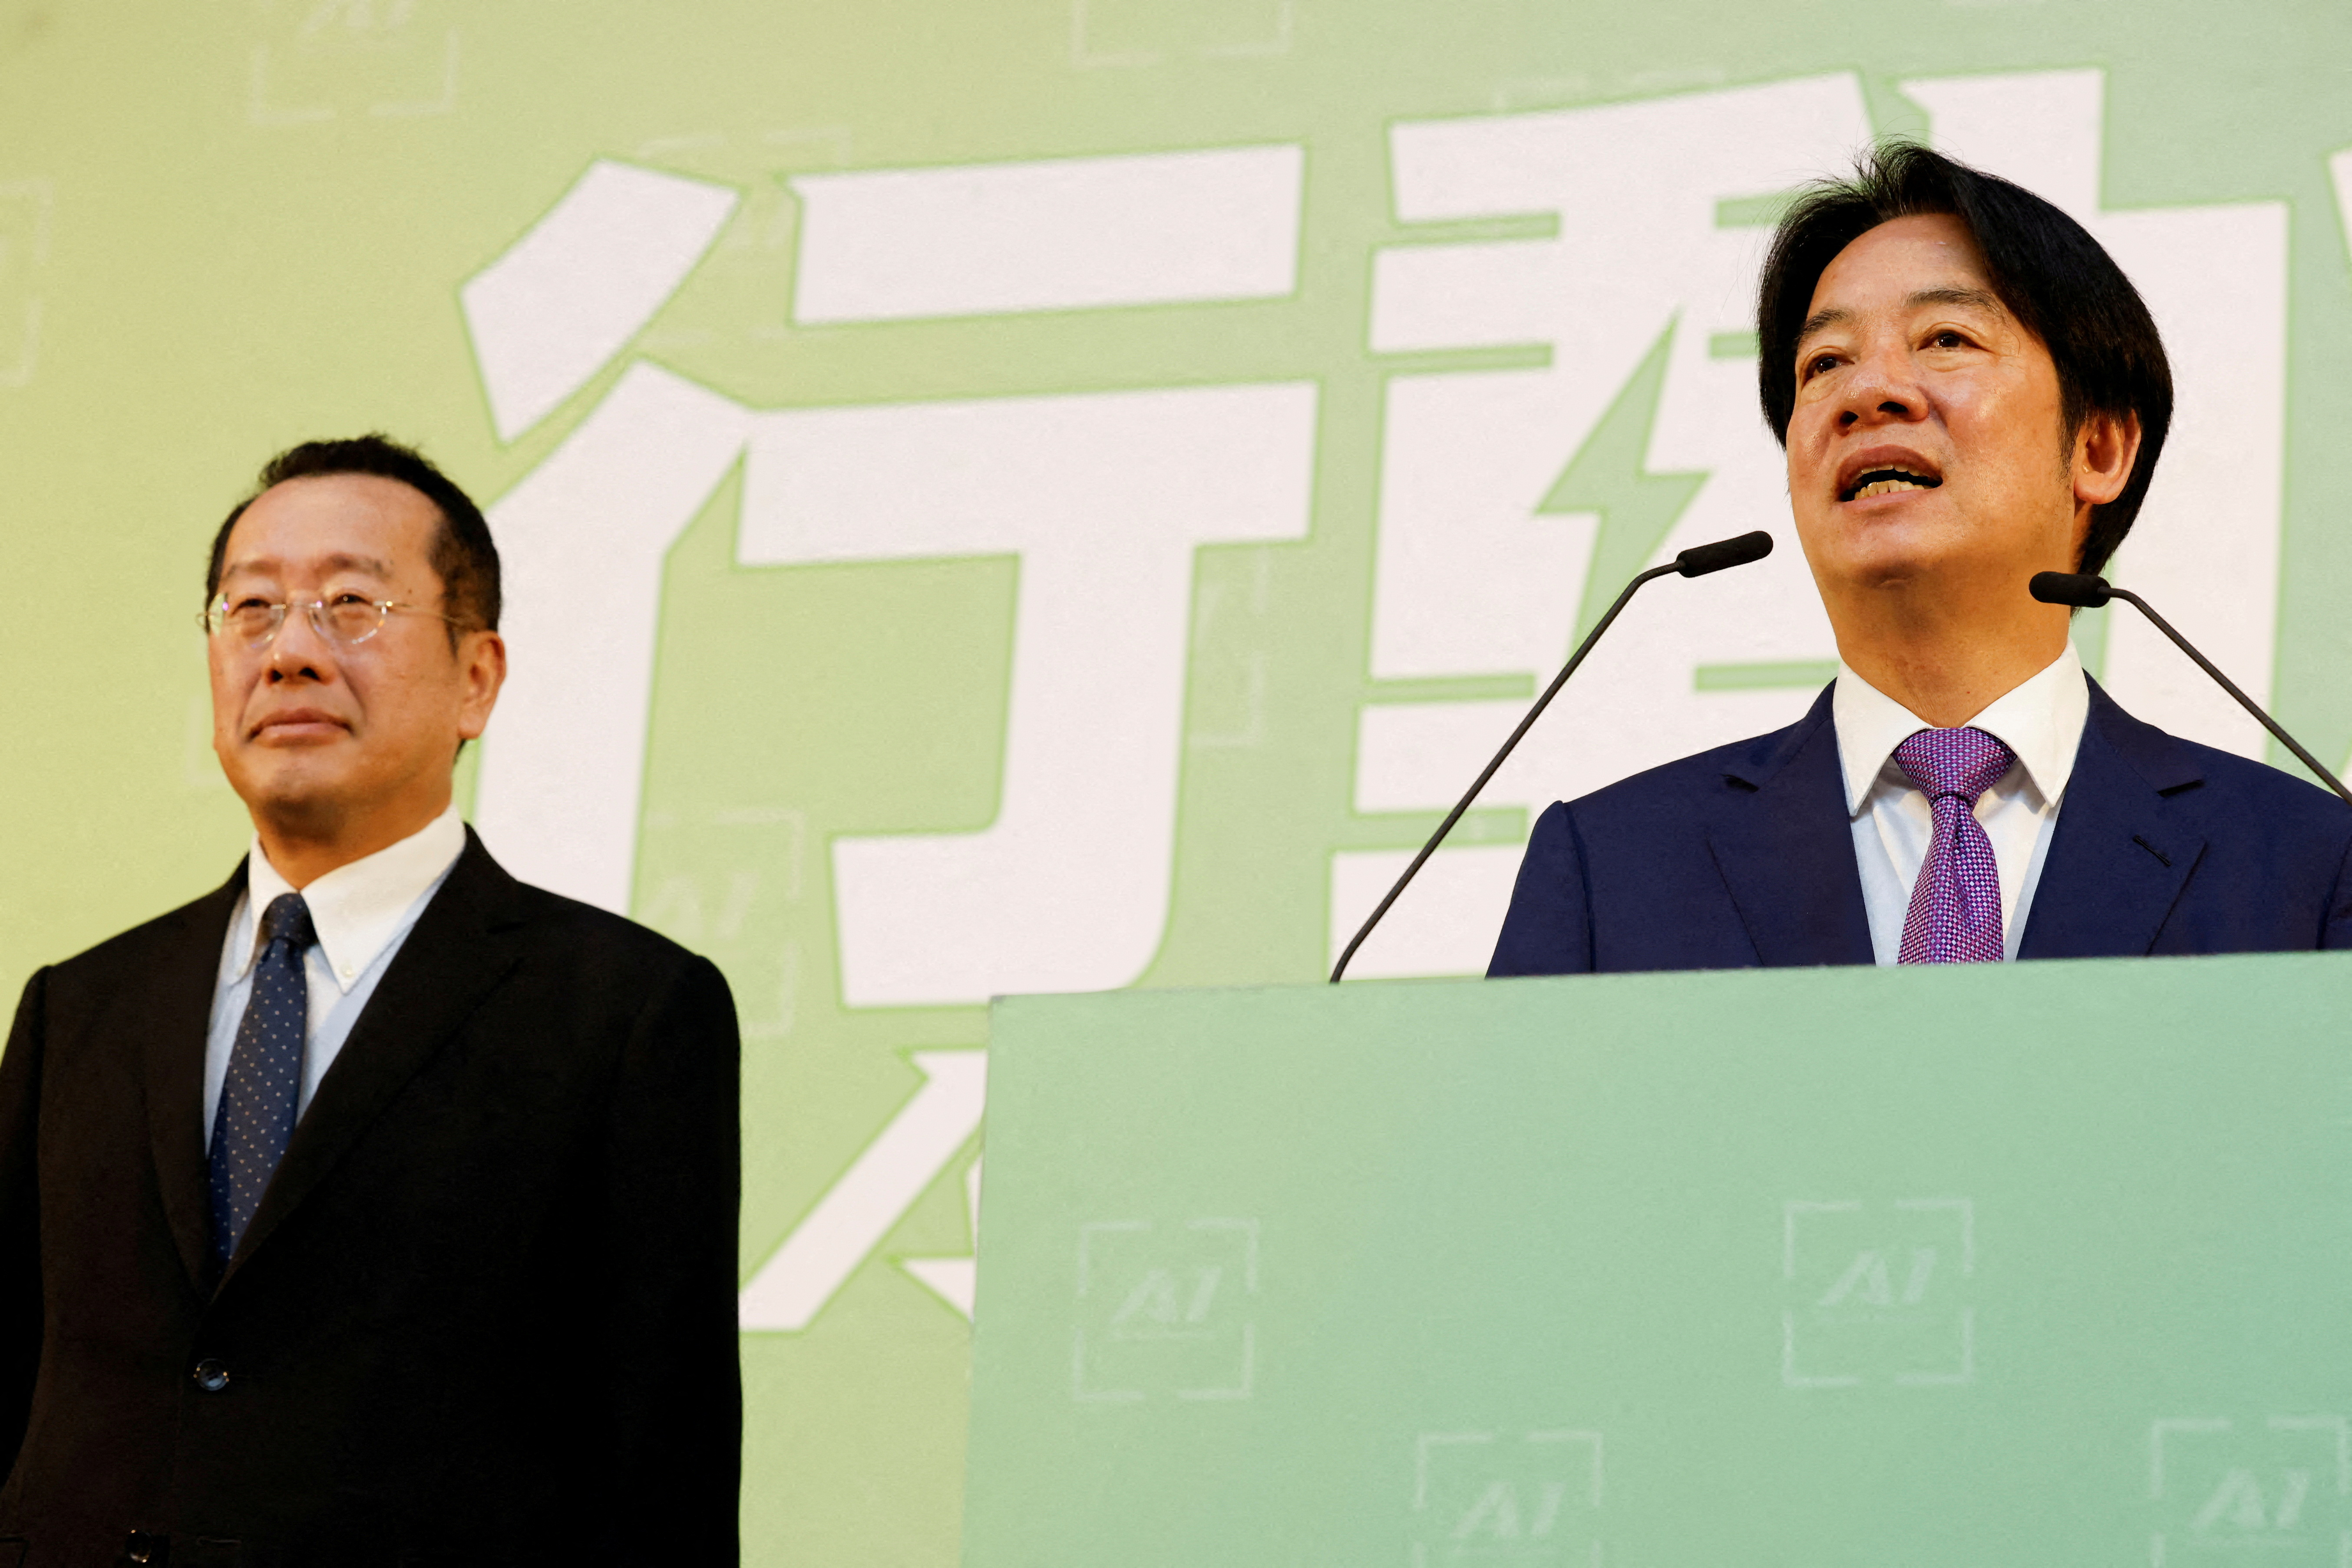 Taiwan President-elect Lai Ching-te speaks as incoming Defence Minister Wellington Koo stands next to him during a press conference, in Taipei